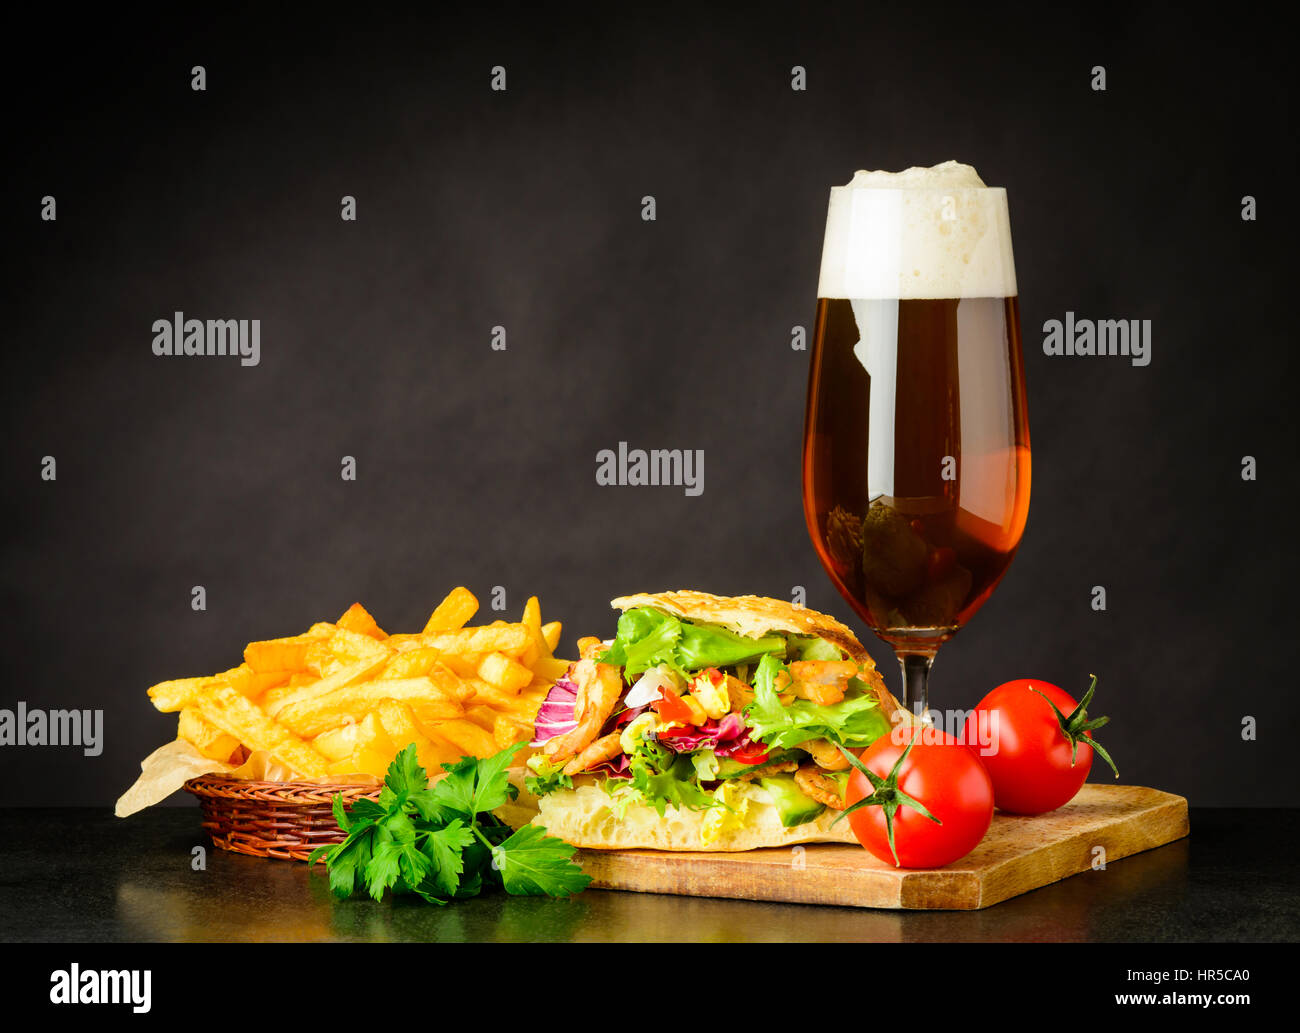 French Fries and Doner Kebap Sandwich with Glass Beer and Fresh Vegetables Stock Photo